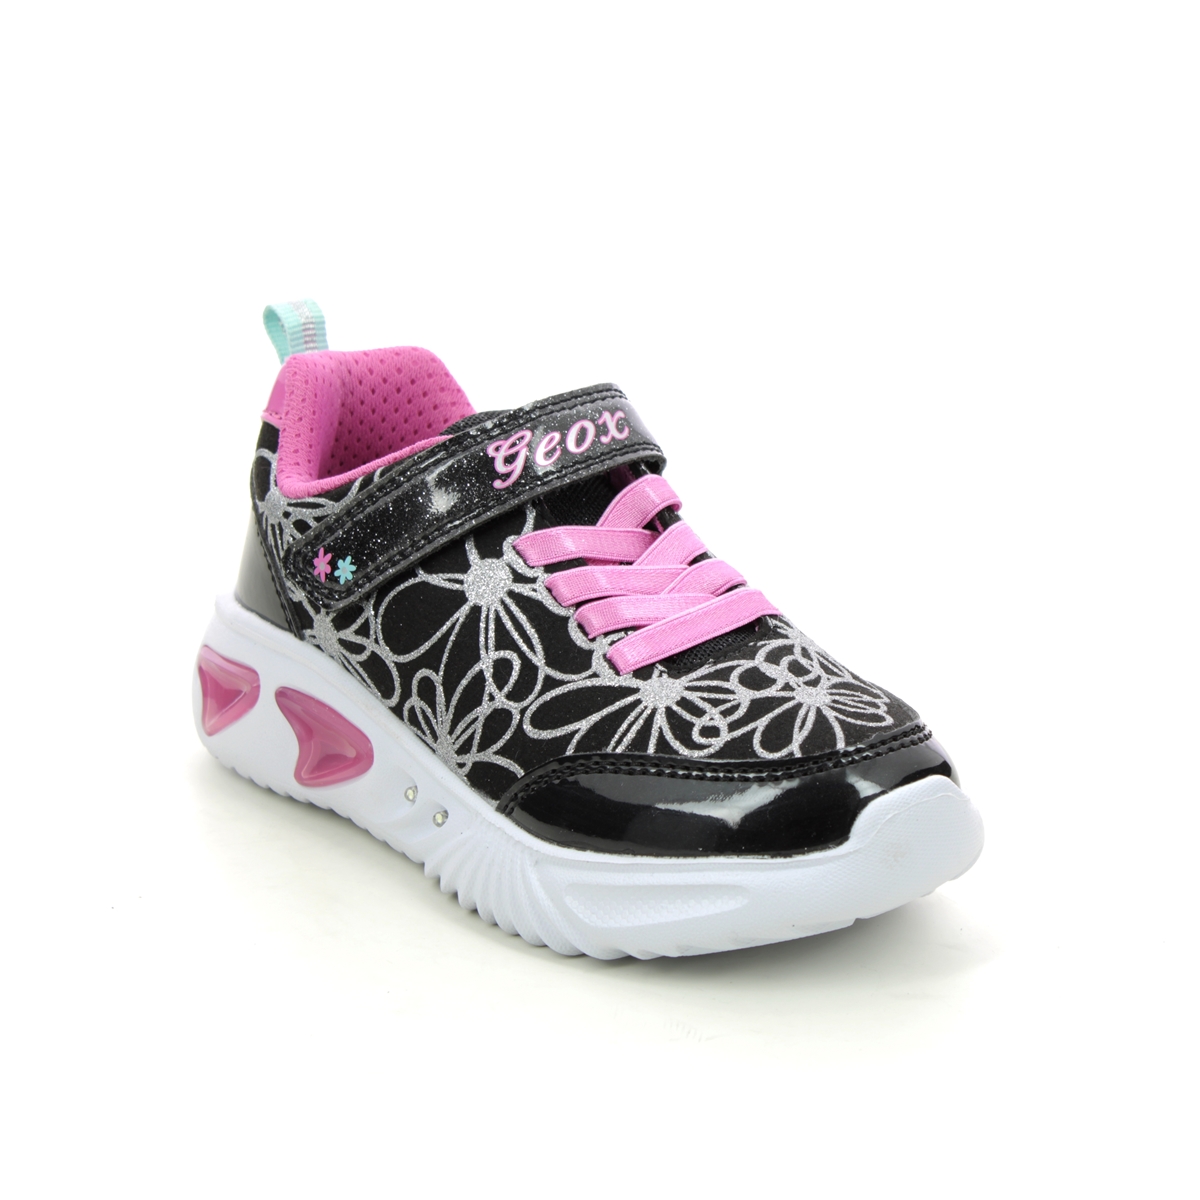 Geox - Assister Lights (Black Pink) J26E9A-C0922 In Size 27 In Plain Black Pink For kids